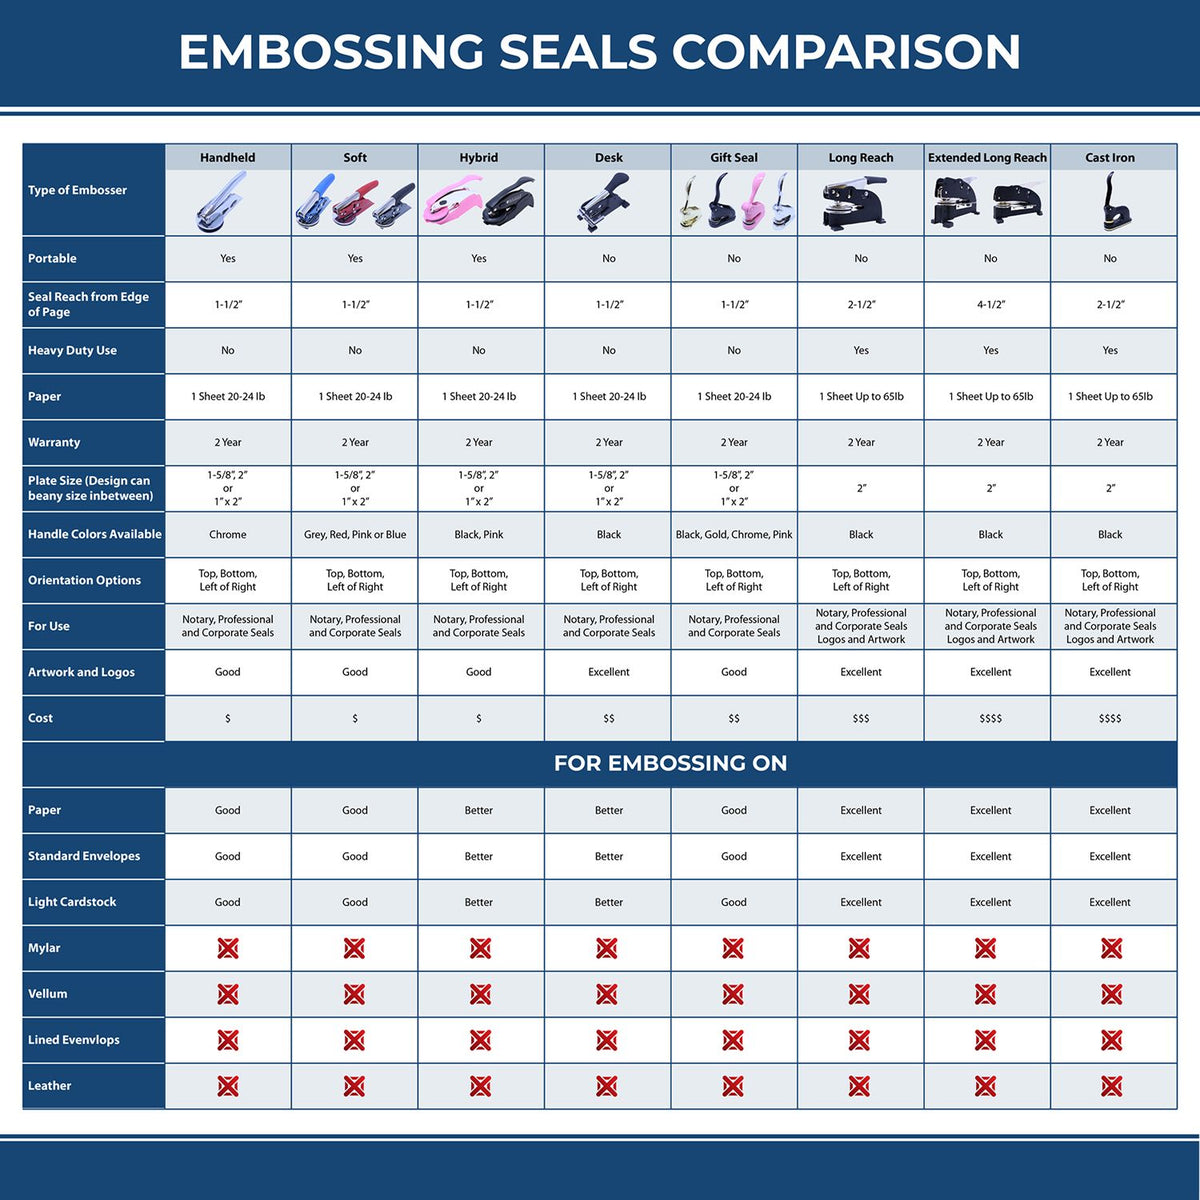 A comparison chart for the different types of mount models available for the Hybrid Maine Architect Seal